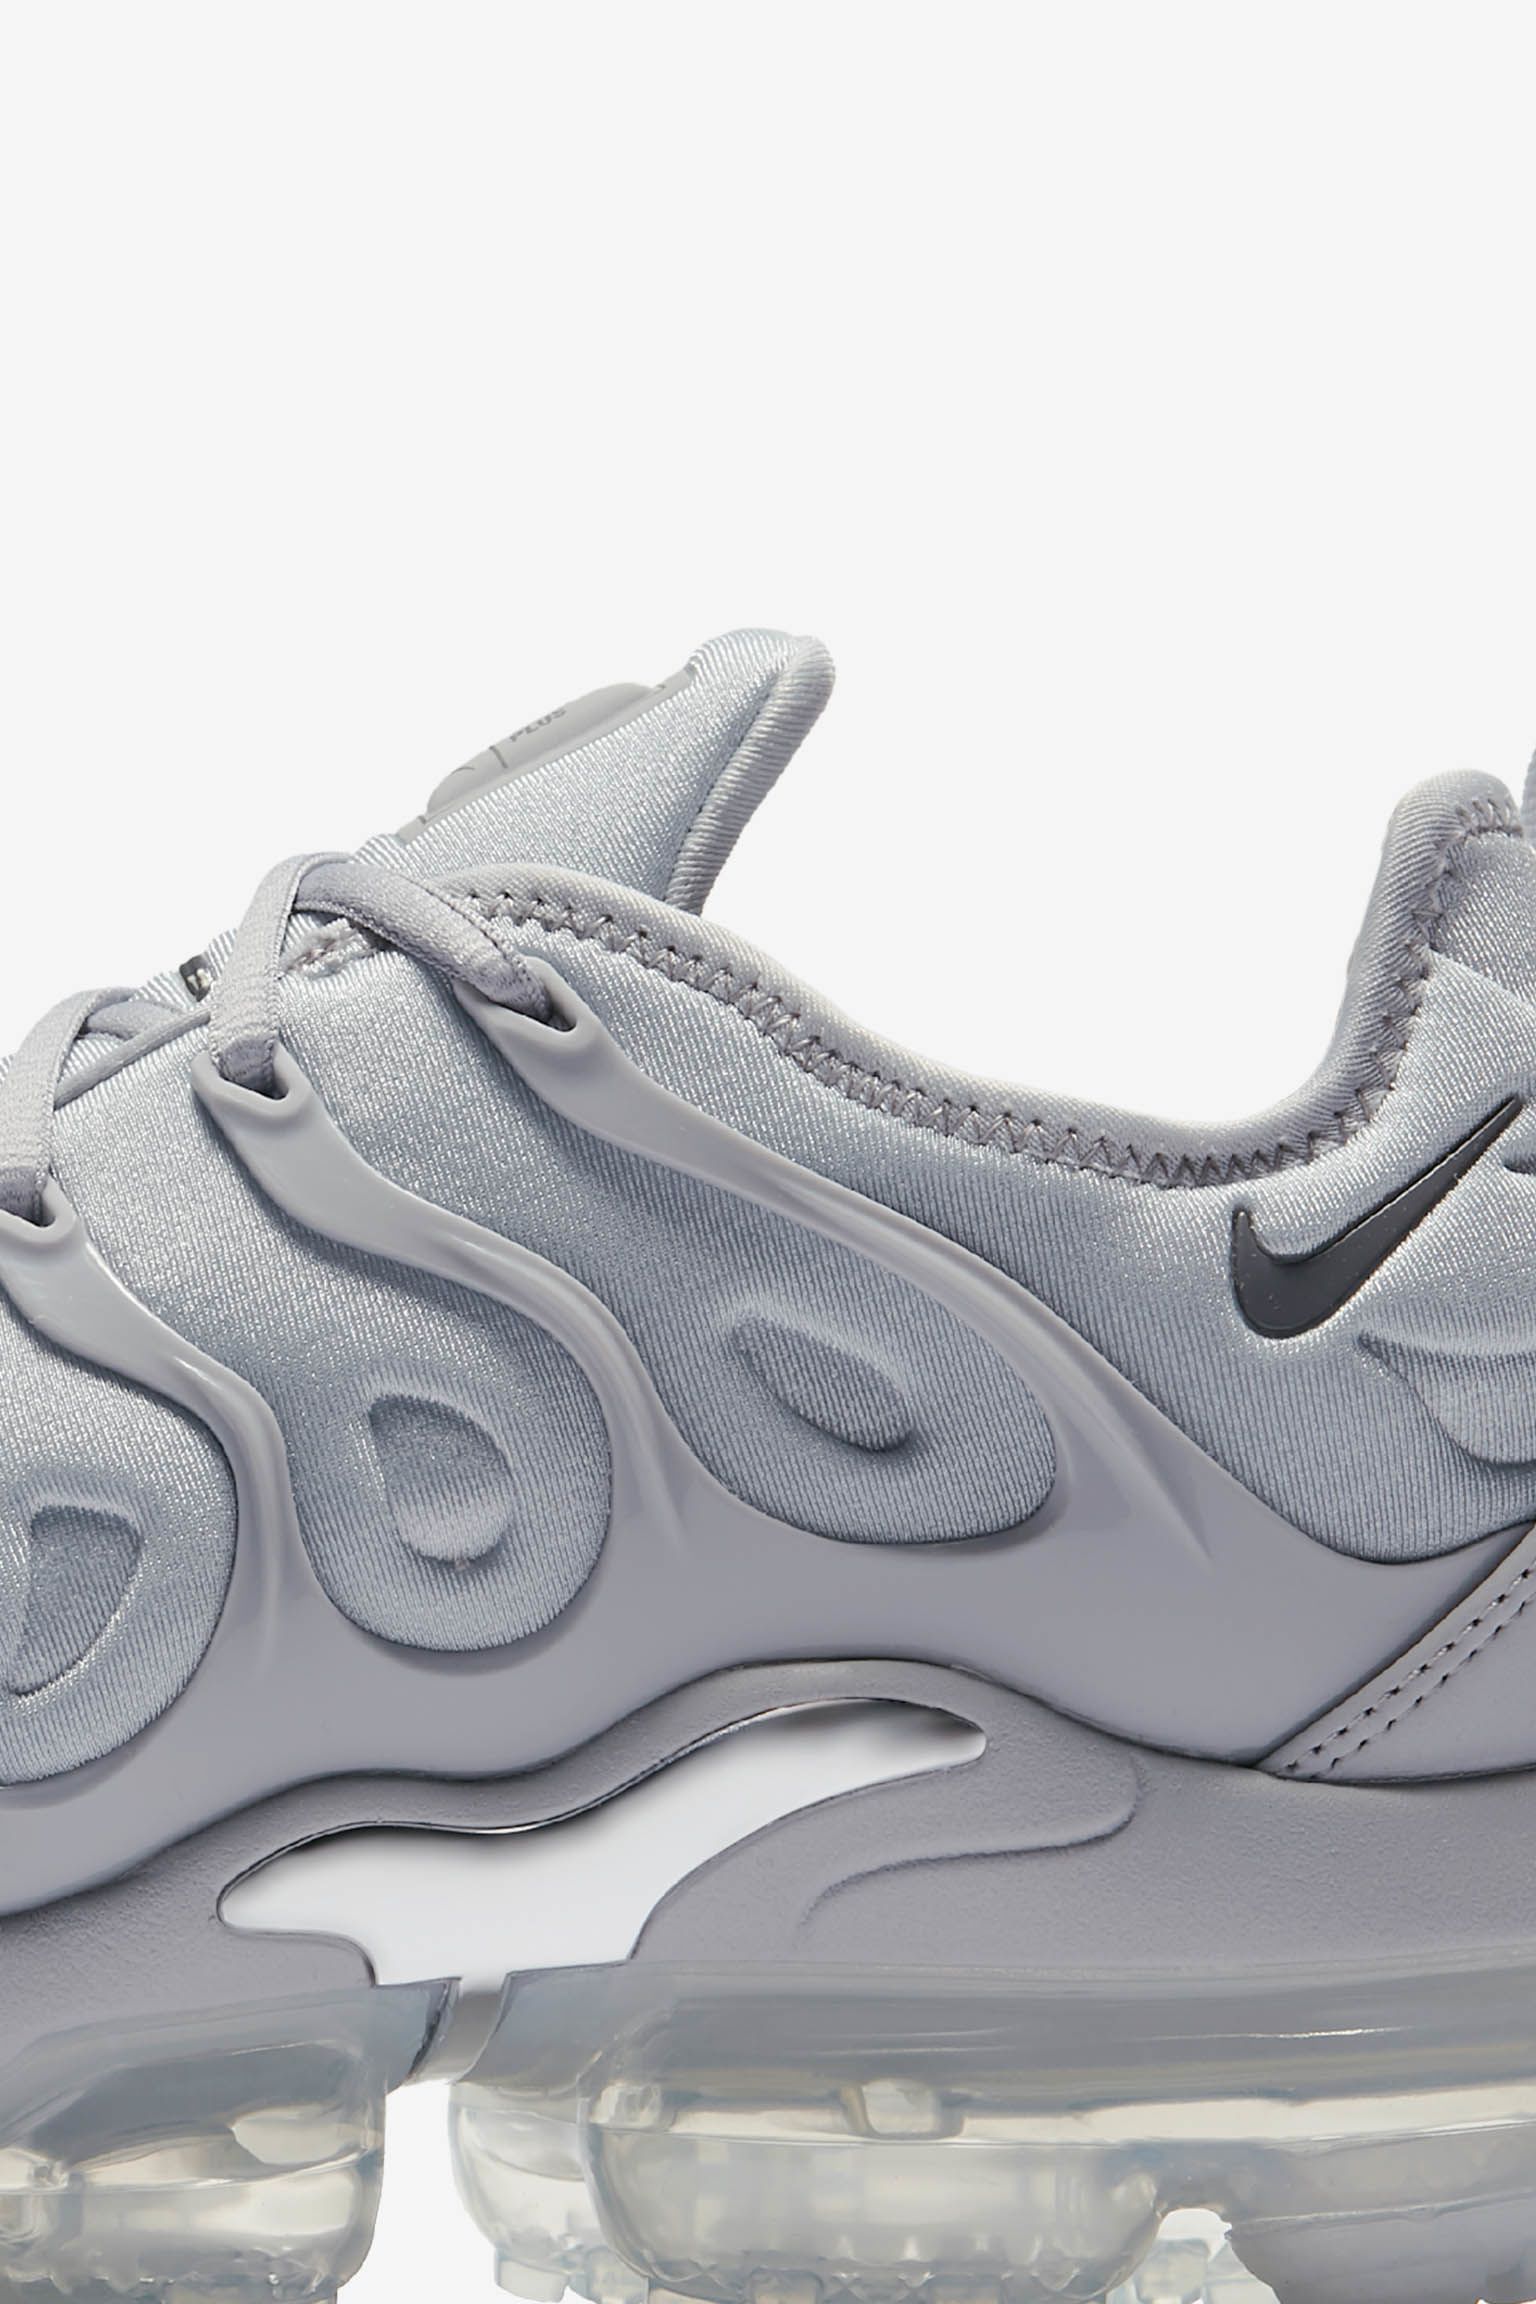 Scorch approach bullet Nike Air Vapormax Plus 'Cool Grey & Metallic Silver' Release Date. Nike  SNKRS